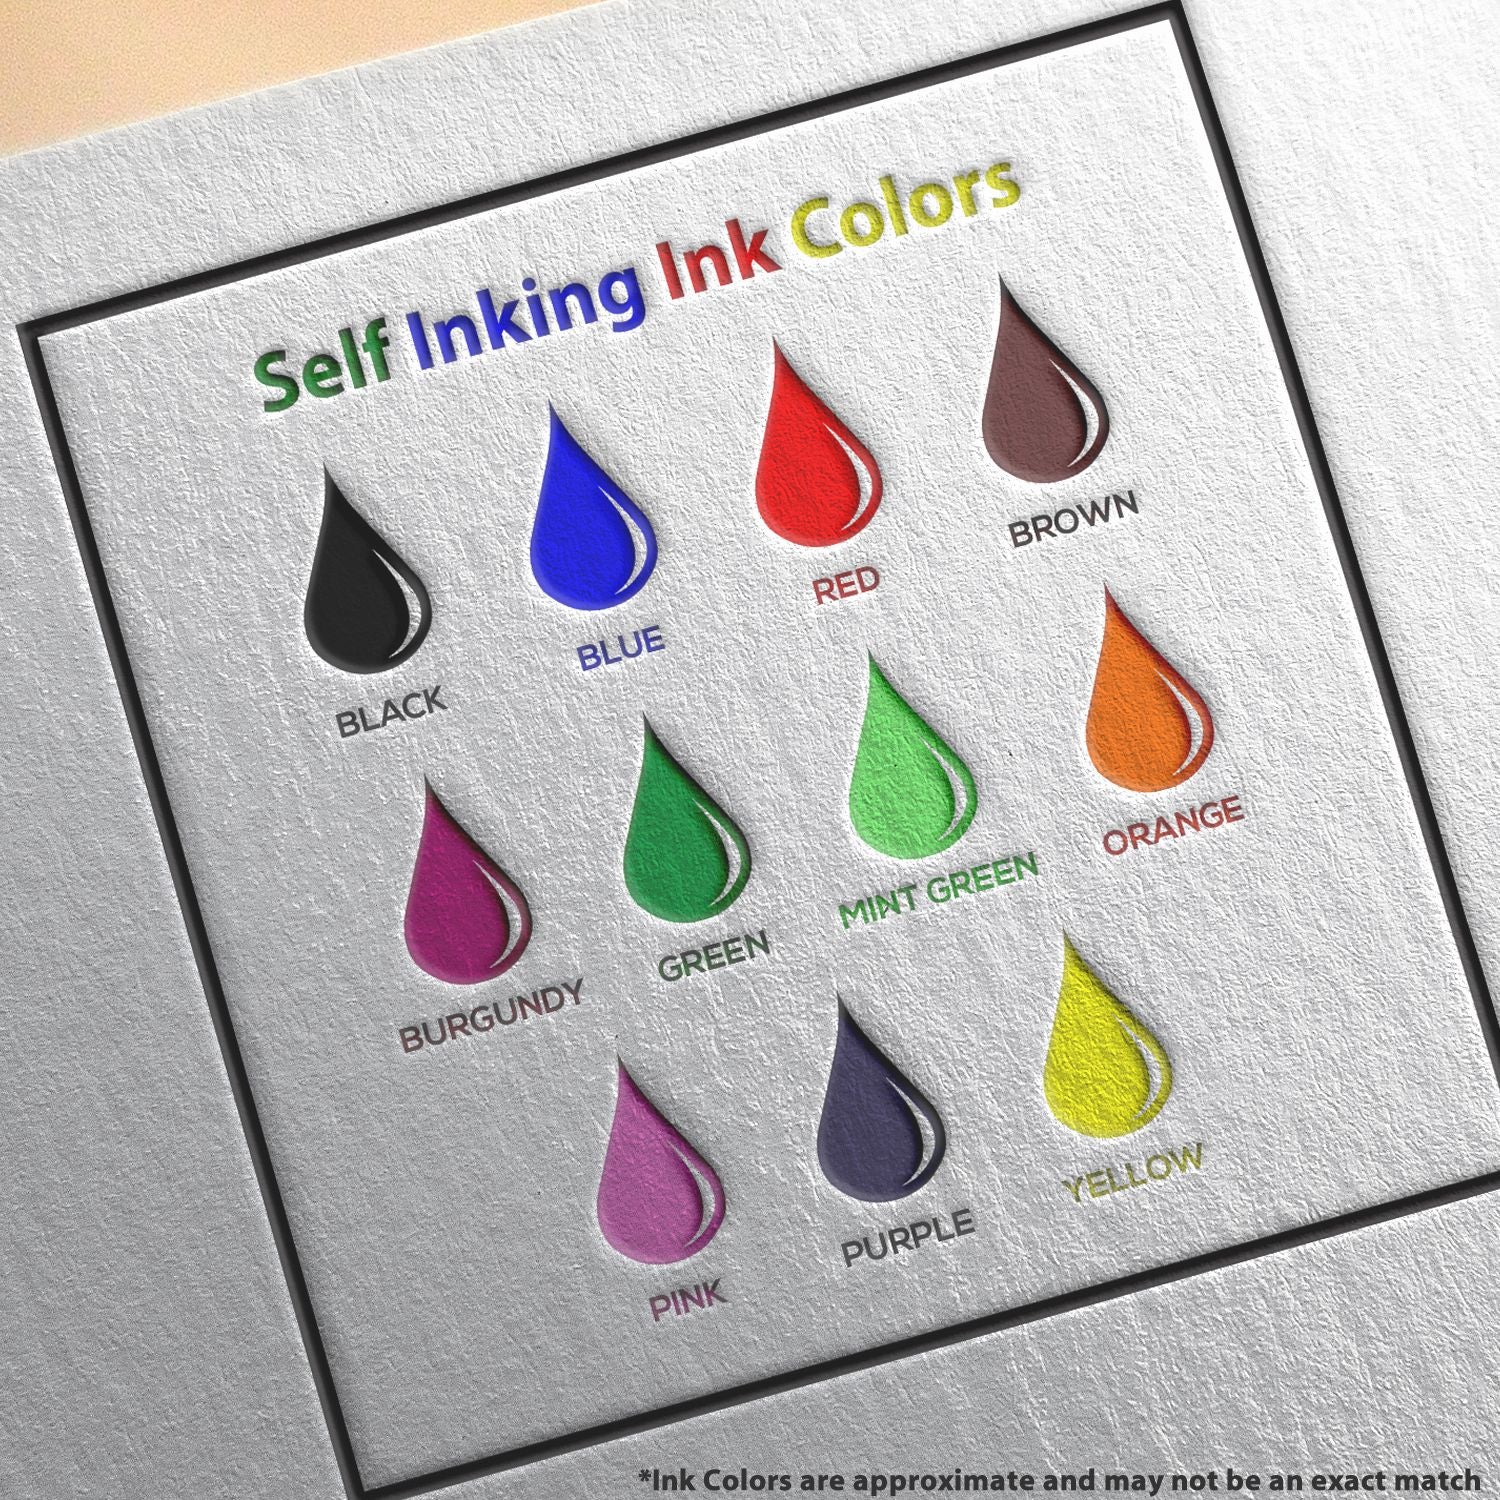 A picture showing the different ink colors or hues available for the Self-Inking Connecticut PE Stamp product.